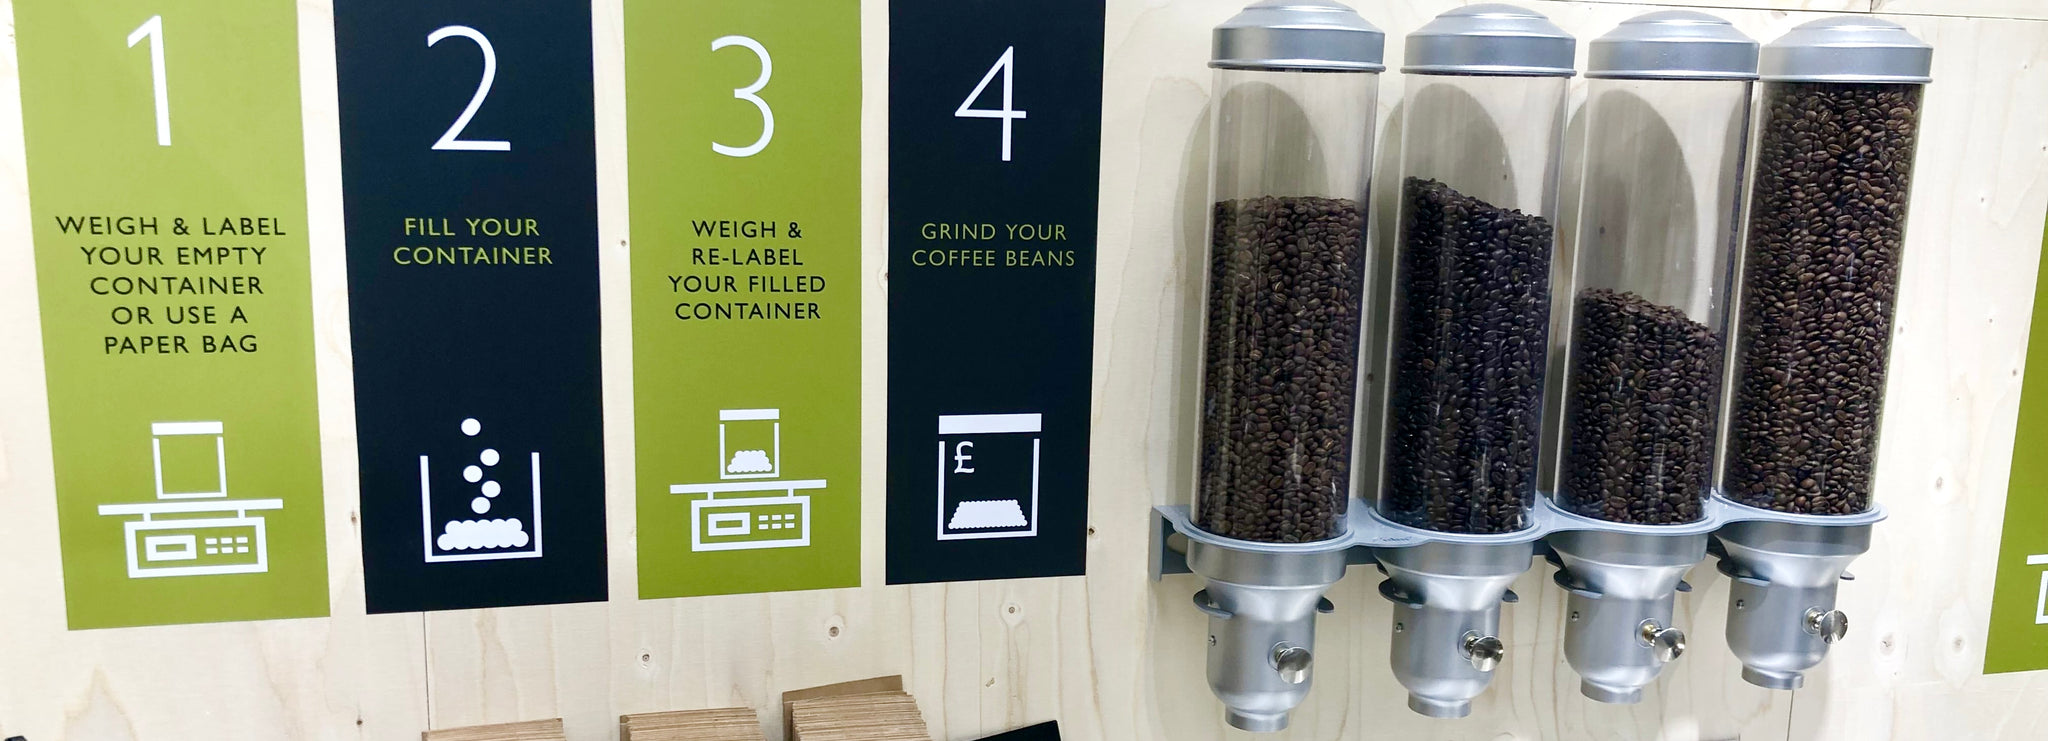 Unpacked coffee display at Waitrose featuring Raw Bean Coffees